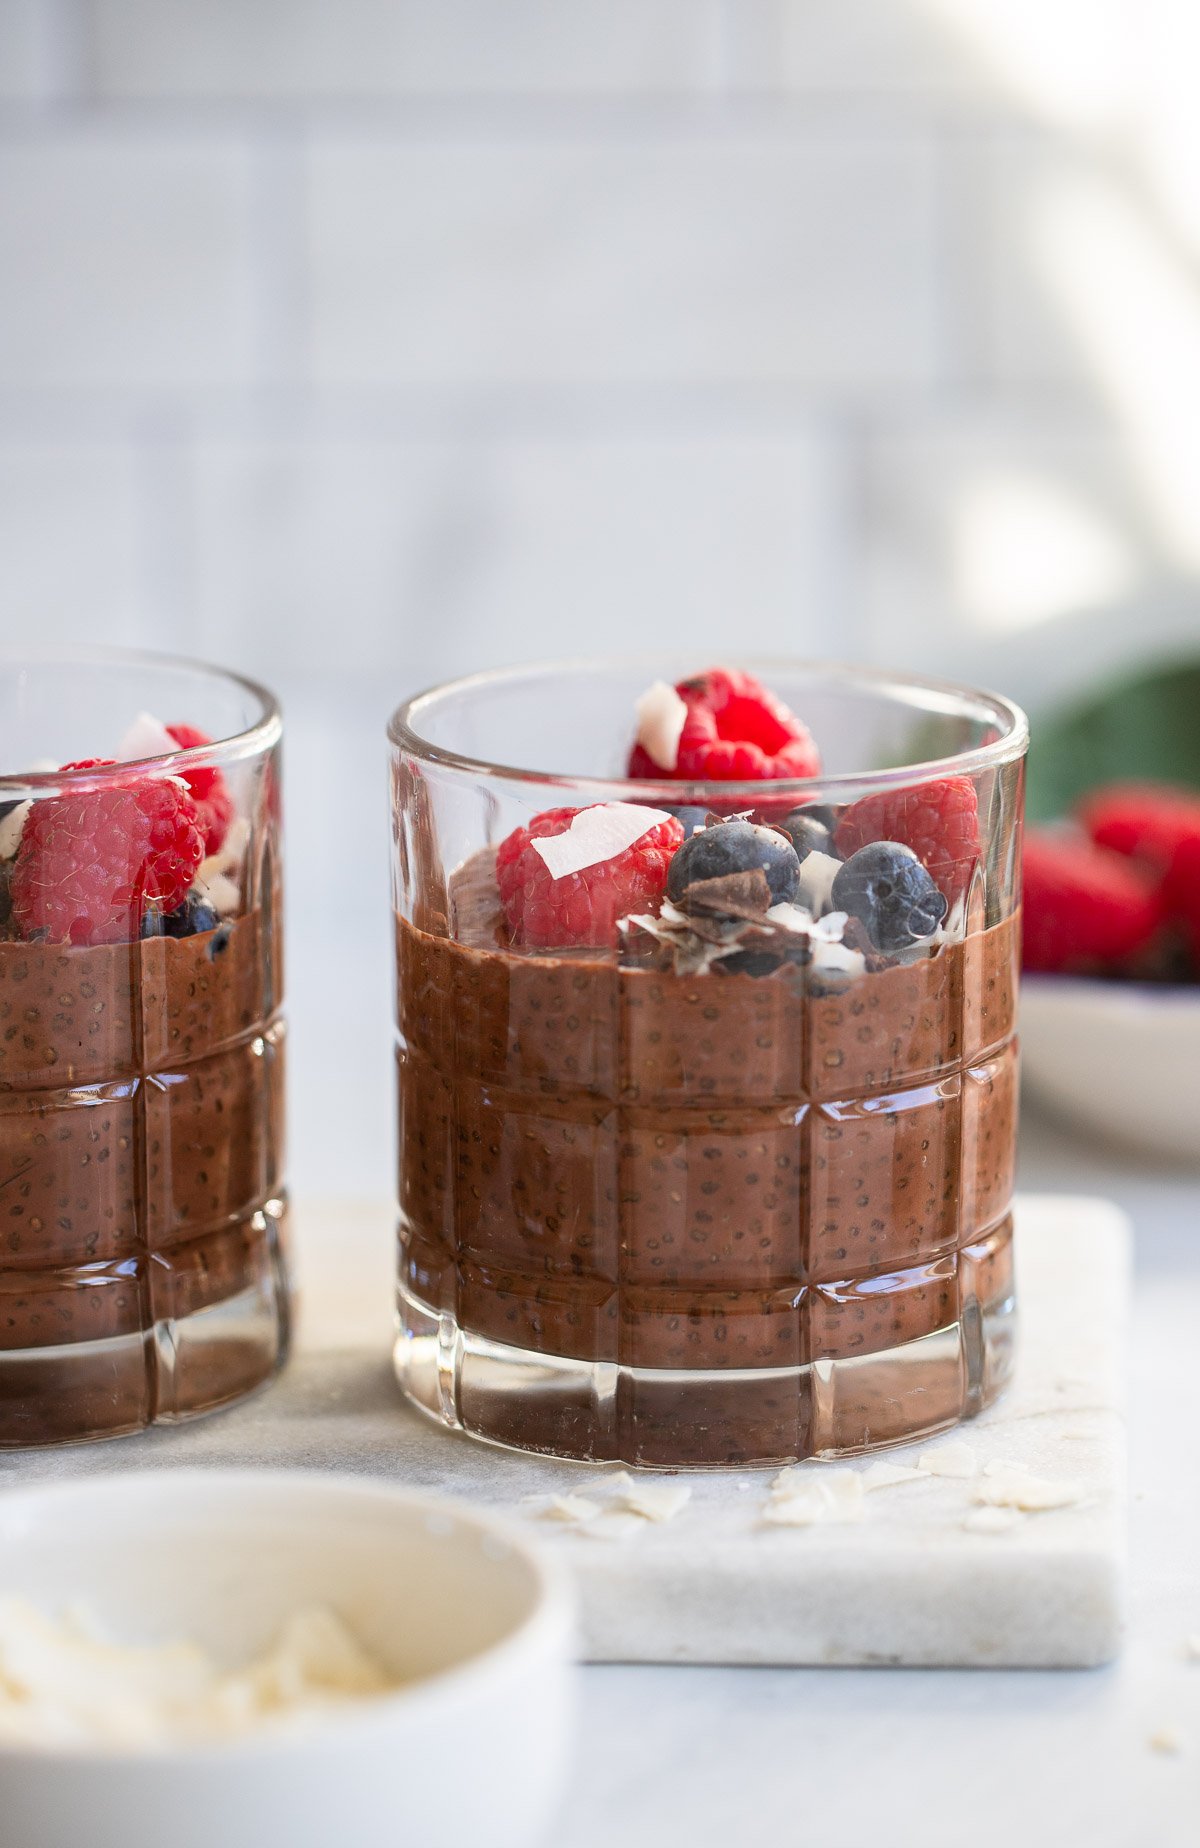 chocolate chia seed pudding in a glass with fresh berries.